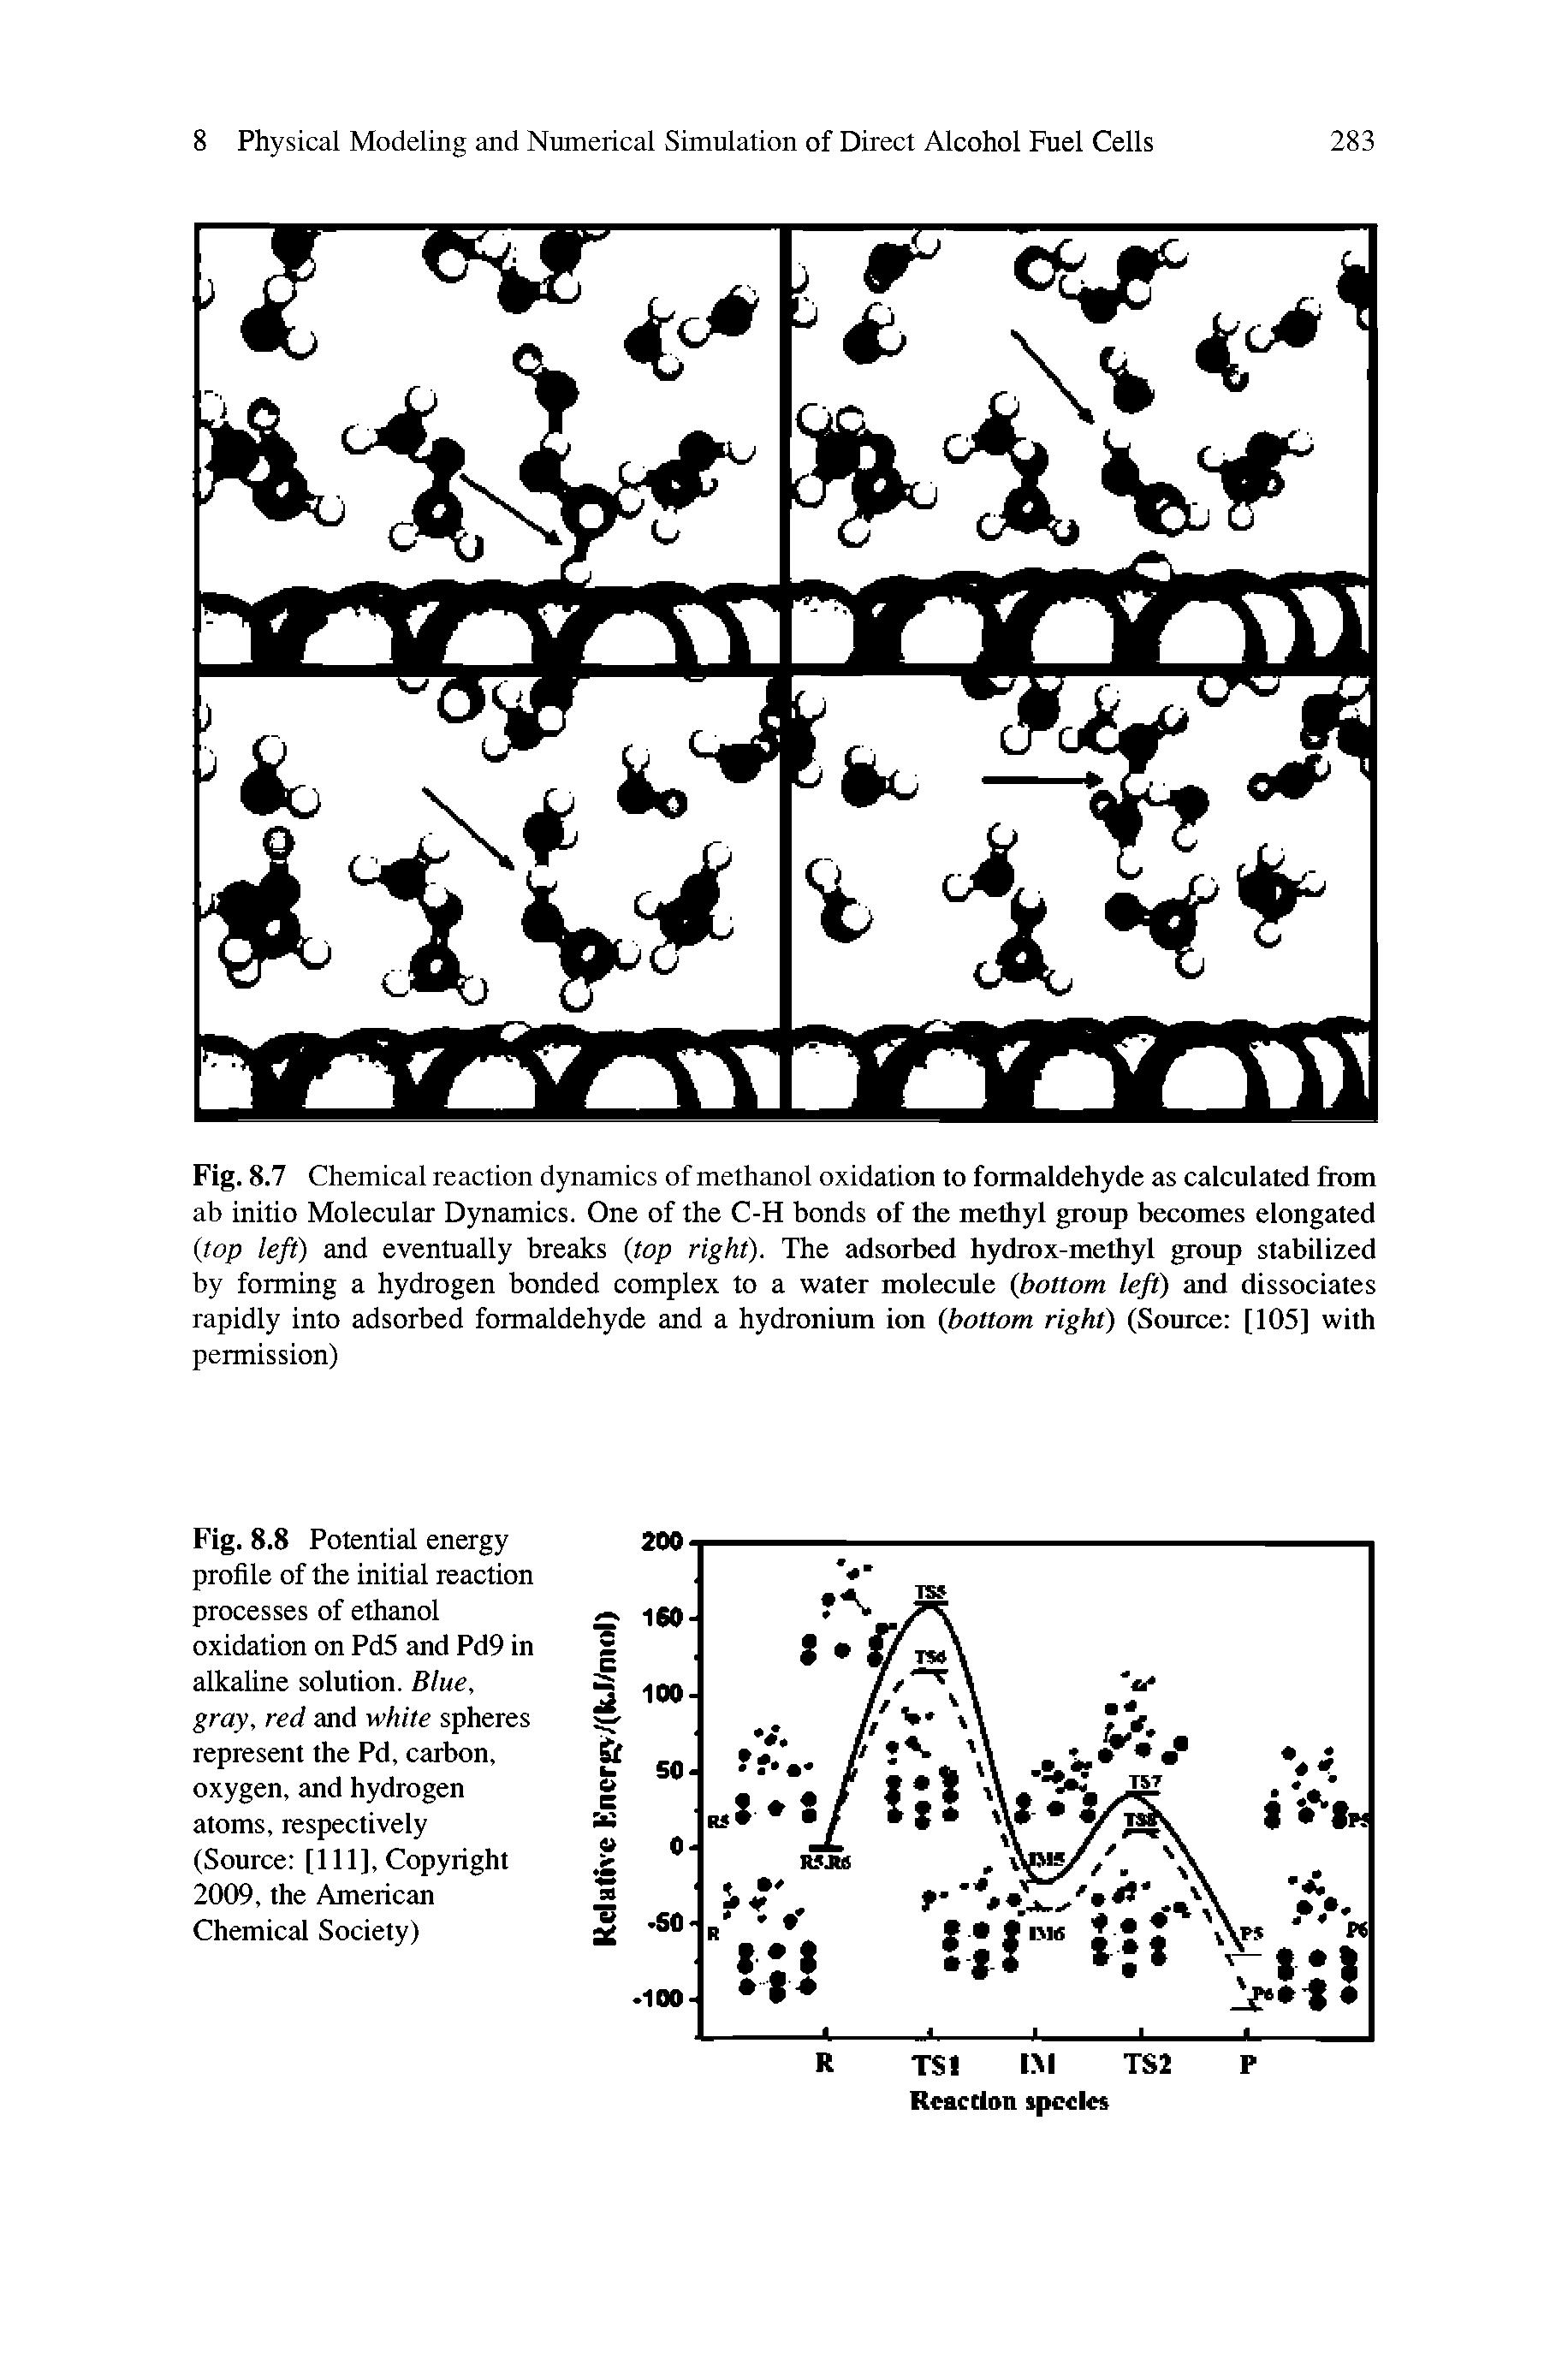 Fig. 8.7 Chemical reaction dynamics of methanol oxidation to formaldehyde as calculated from ab initio Molecular Dynamics. One of the C-H bonds of the methyl group becomes elongated (top left) and eventually breaks (top right). The adsorbed hydrox-methyl group stabilized by forming a hydrogen bonded complex to a water molecule (bottom left) and dissociates rapidly into adsorbed formaldehyde and a hydronium ion (bottom right) (Source [105] with permission)...